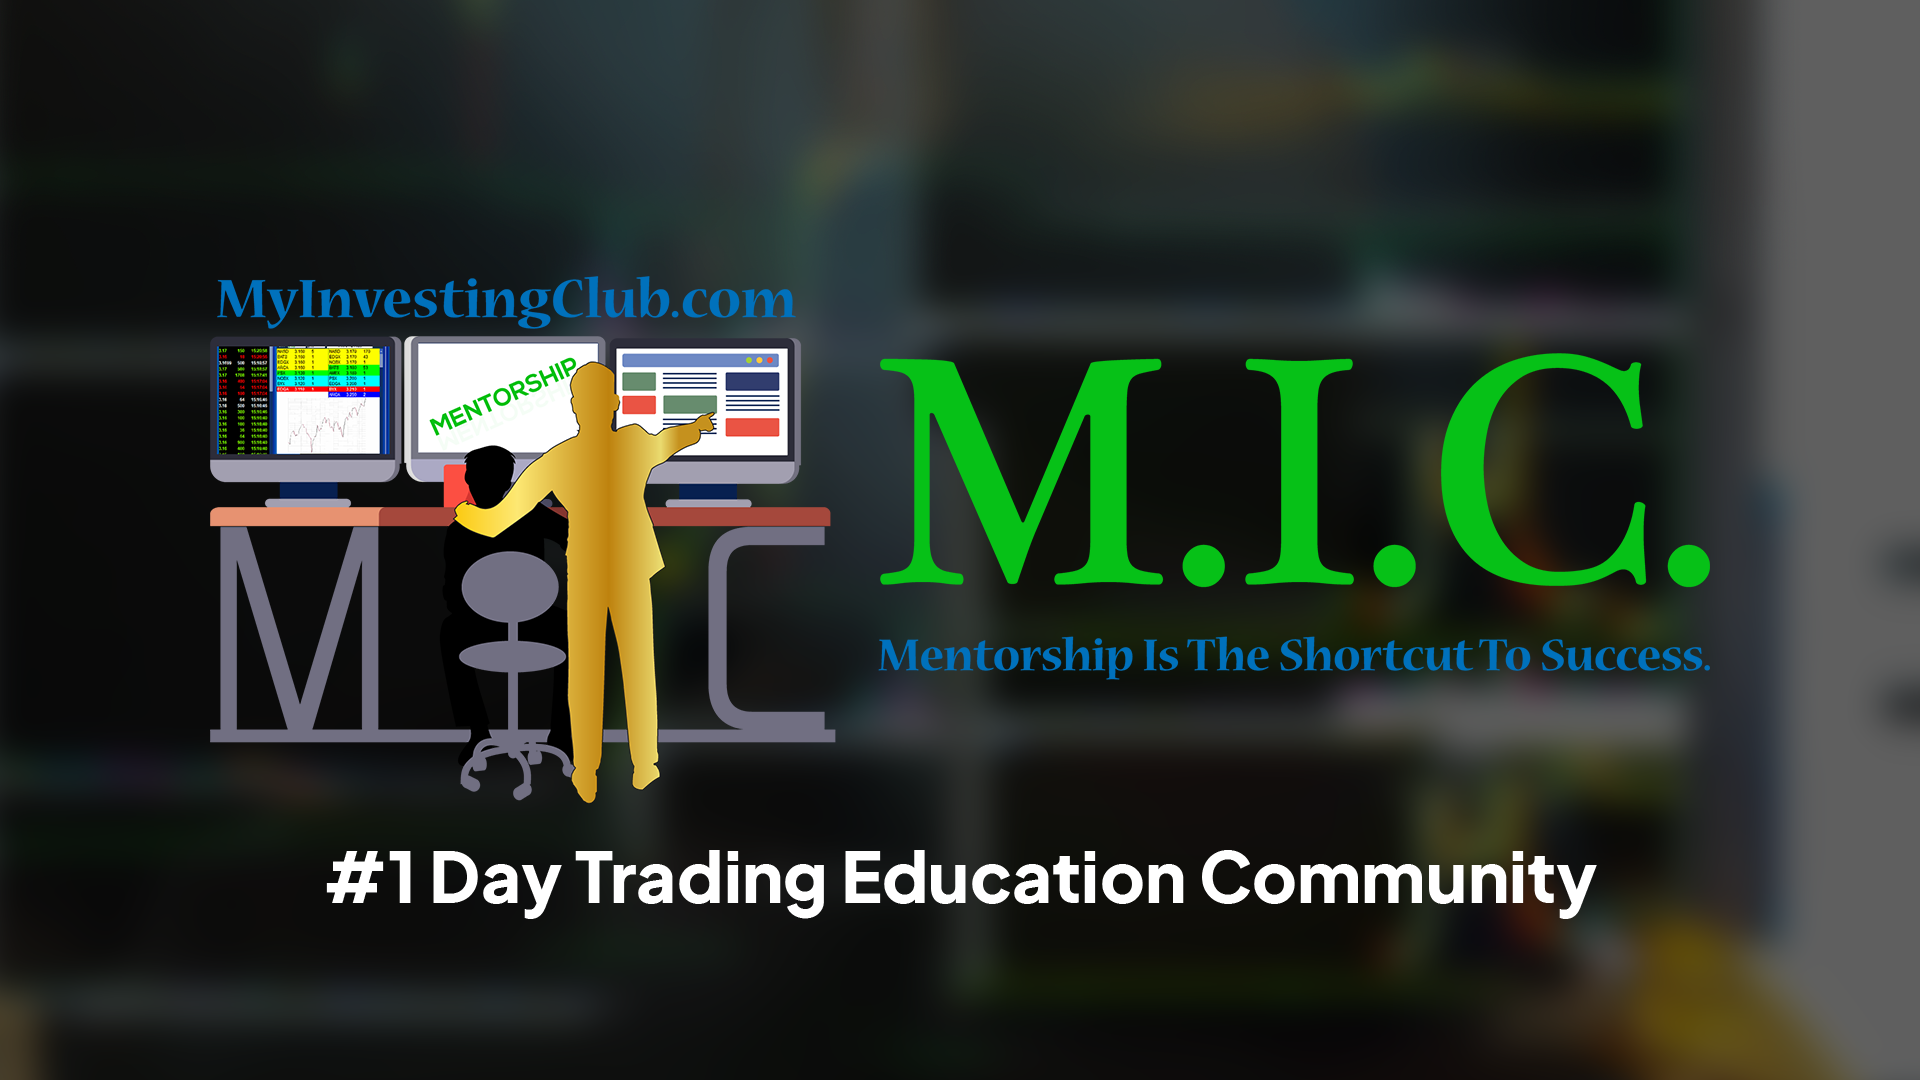 Best Pro Trading Network Offers Options Trading Education With Live Market Recap